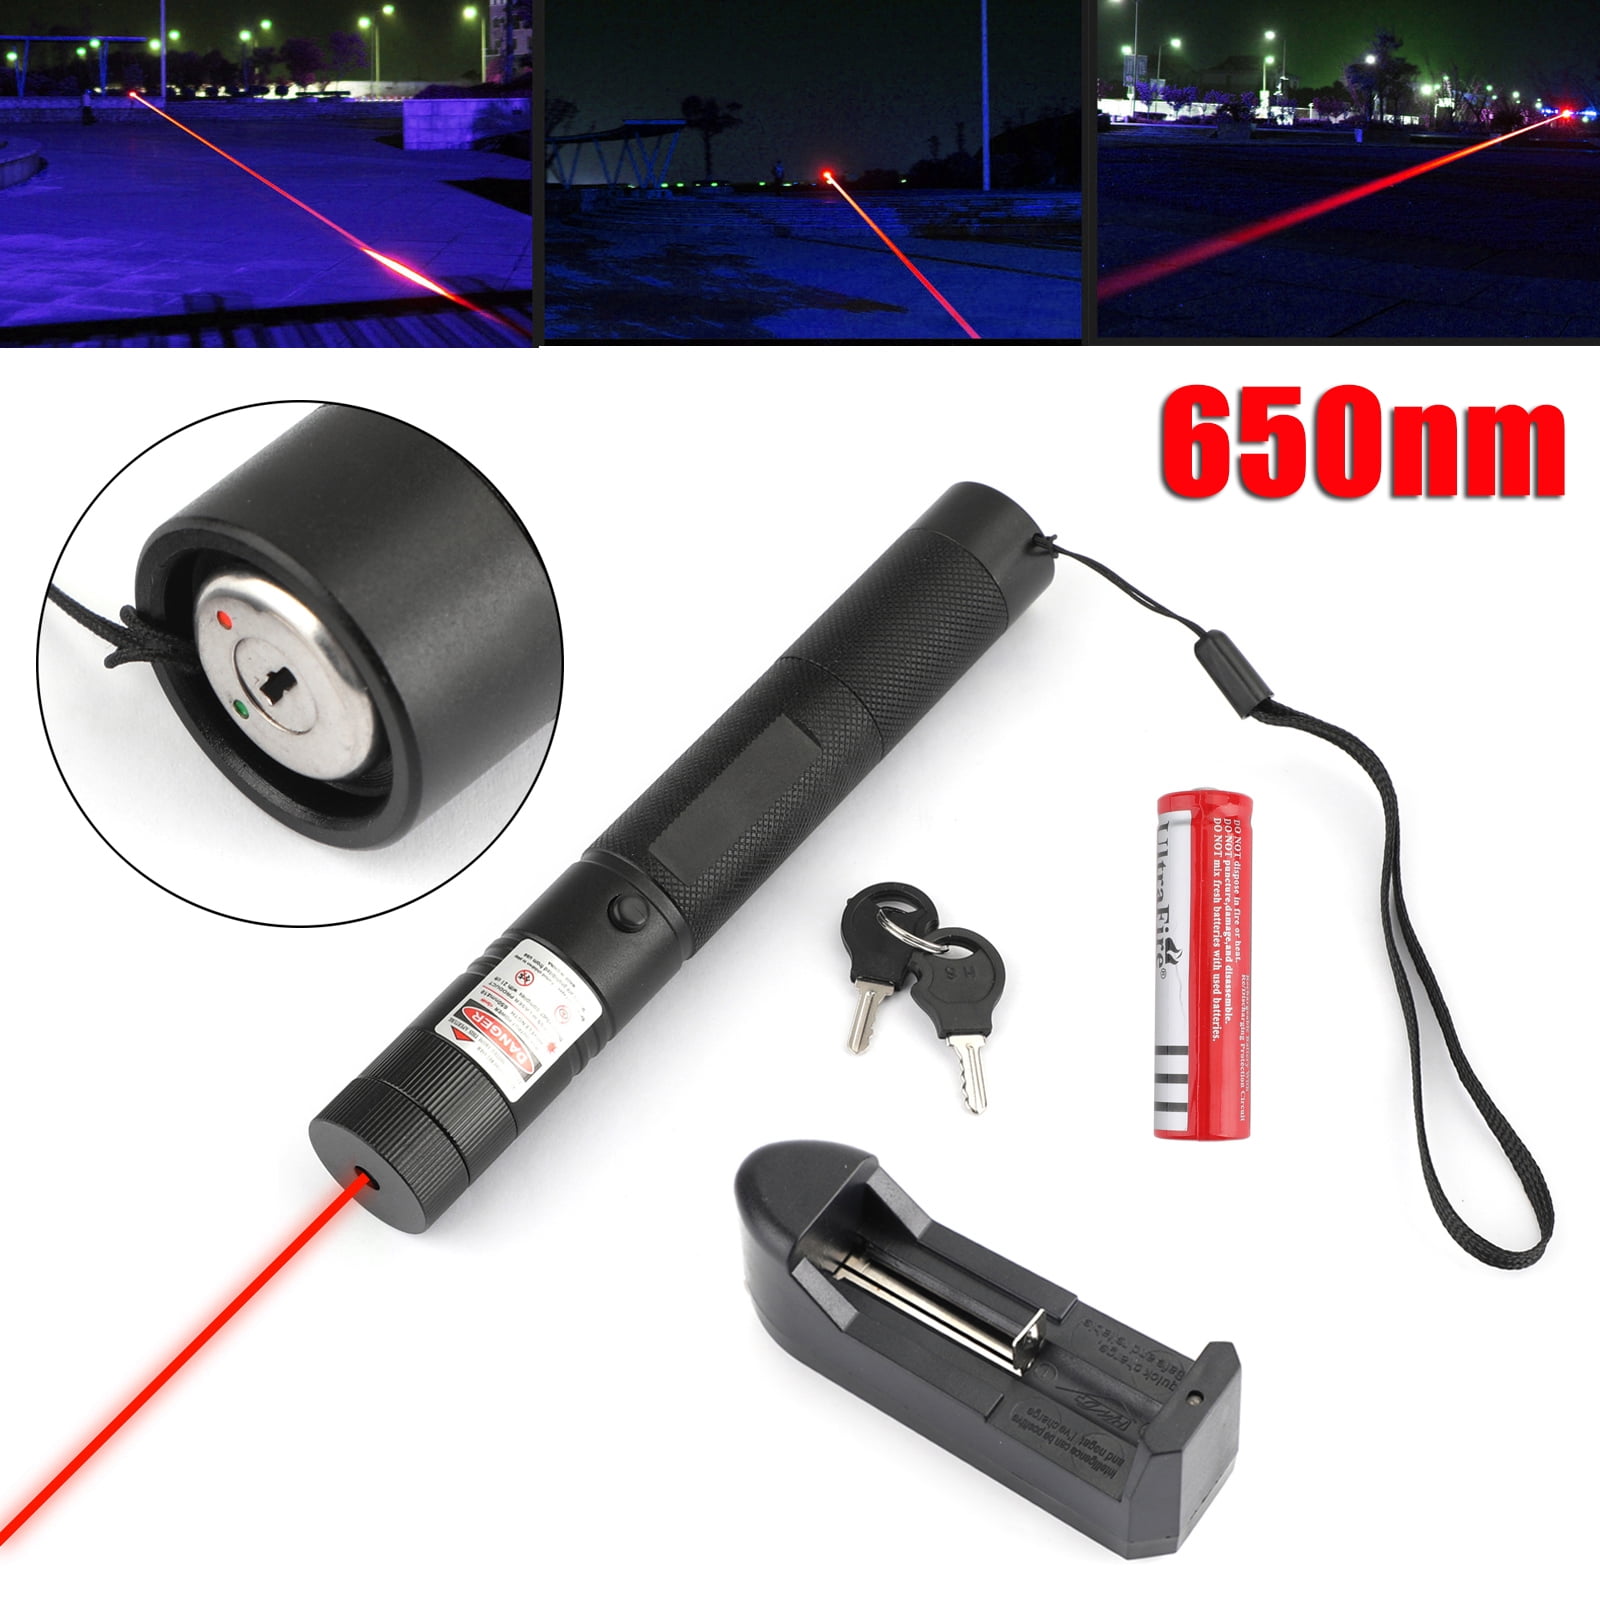 New 650nm Red Laser Pointer Pen Teaching-Aid Red Laser Tool Zoom Adjustable 